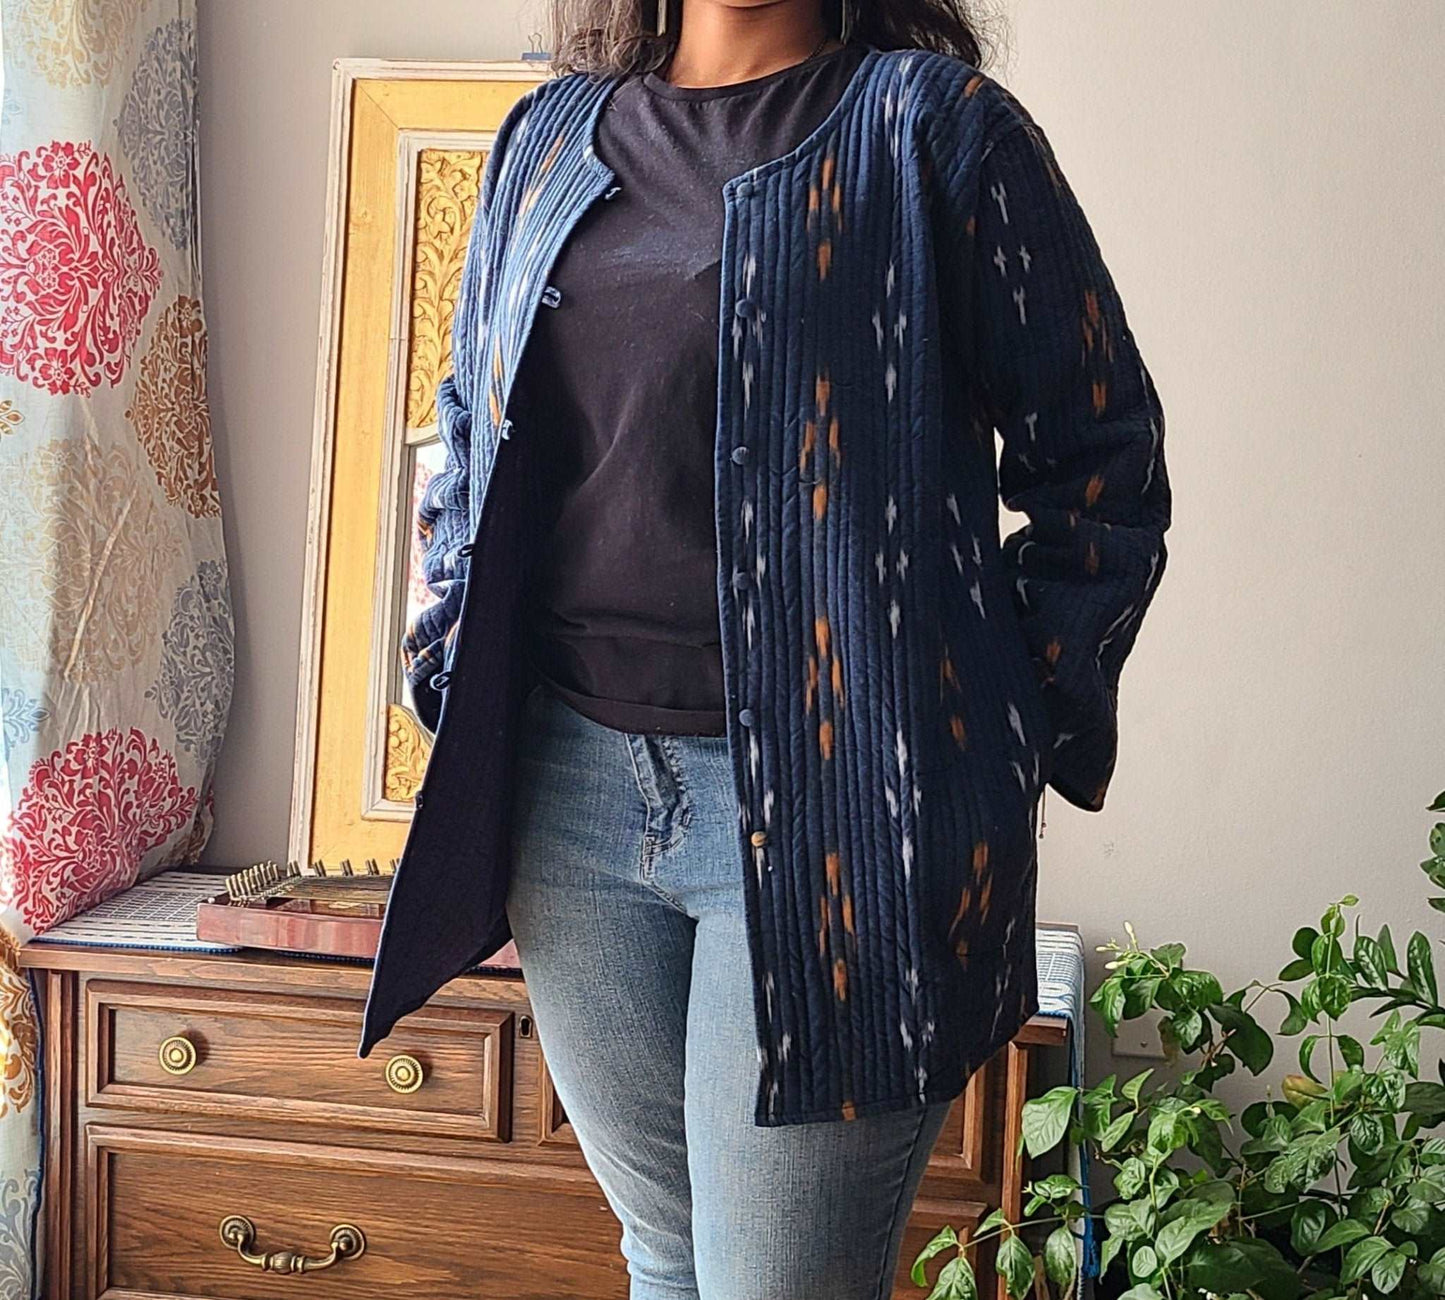 Artisan Crafted Ikat Quilted Jacket: Stylish Warmth for Every Season - Indianidhi